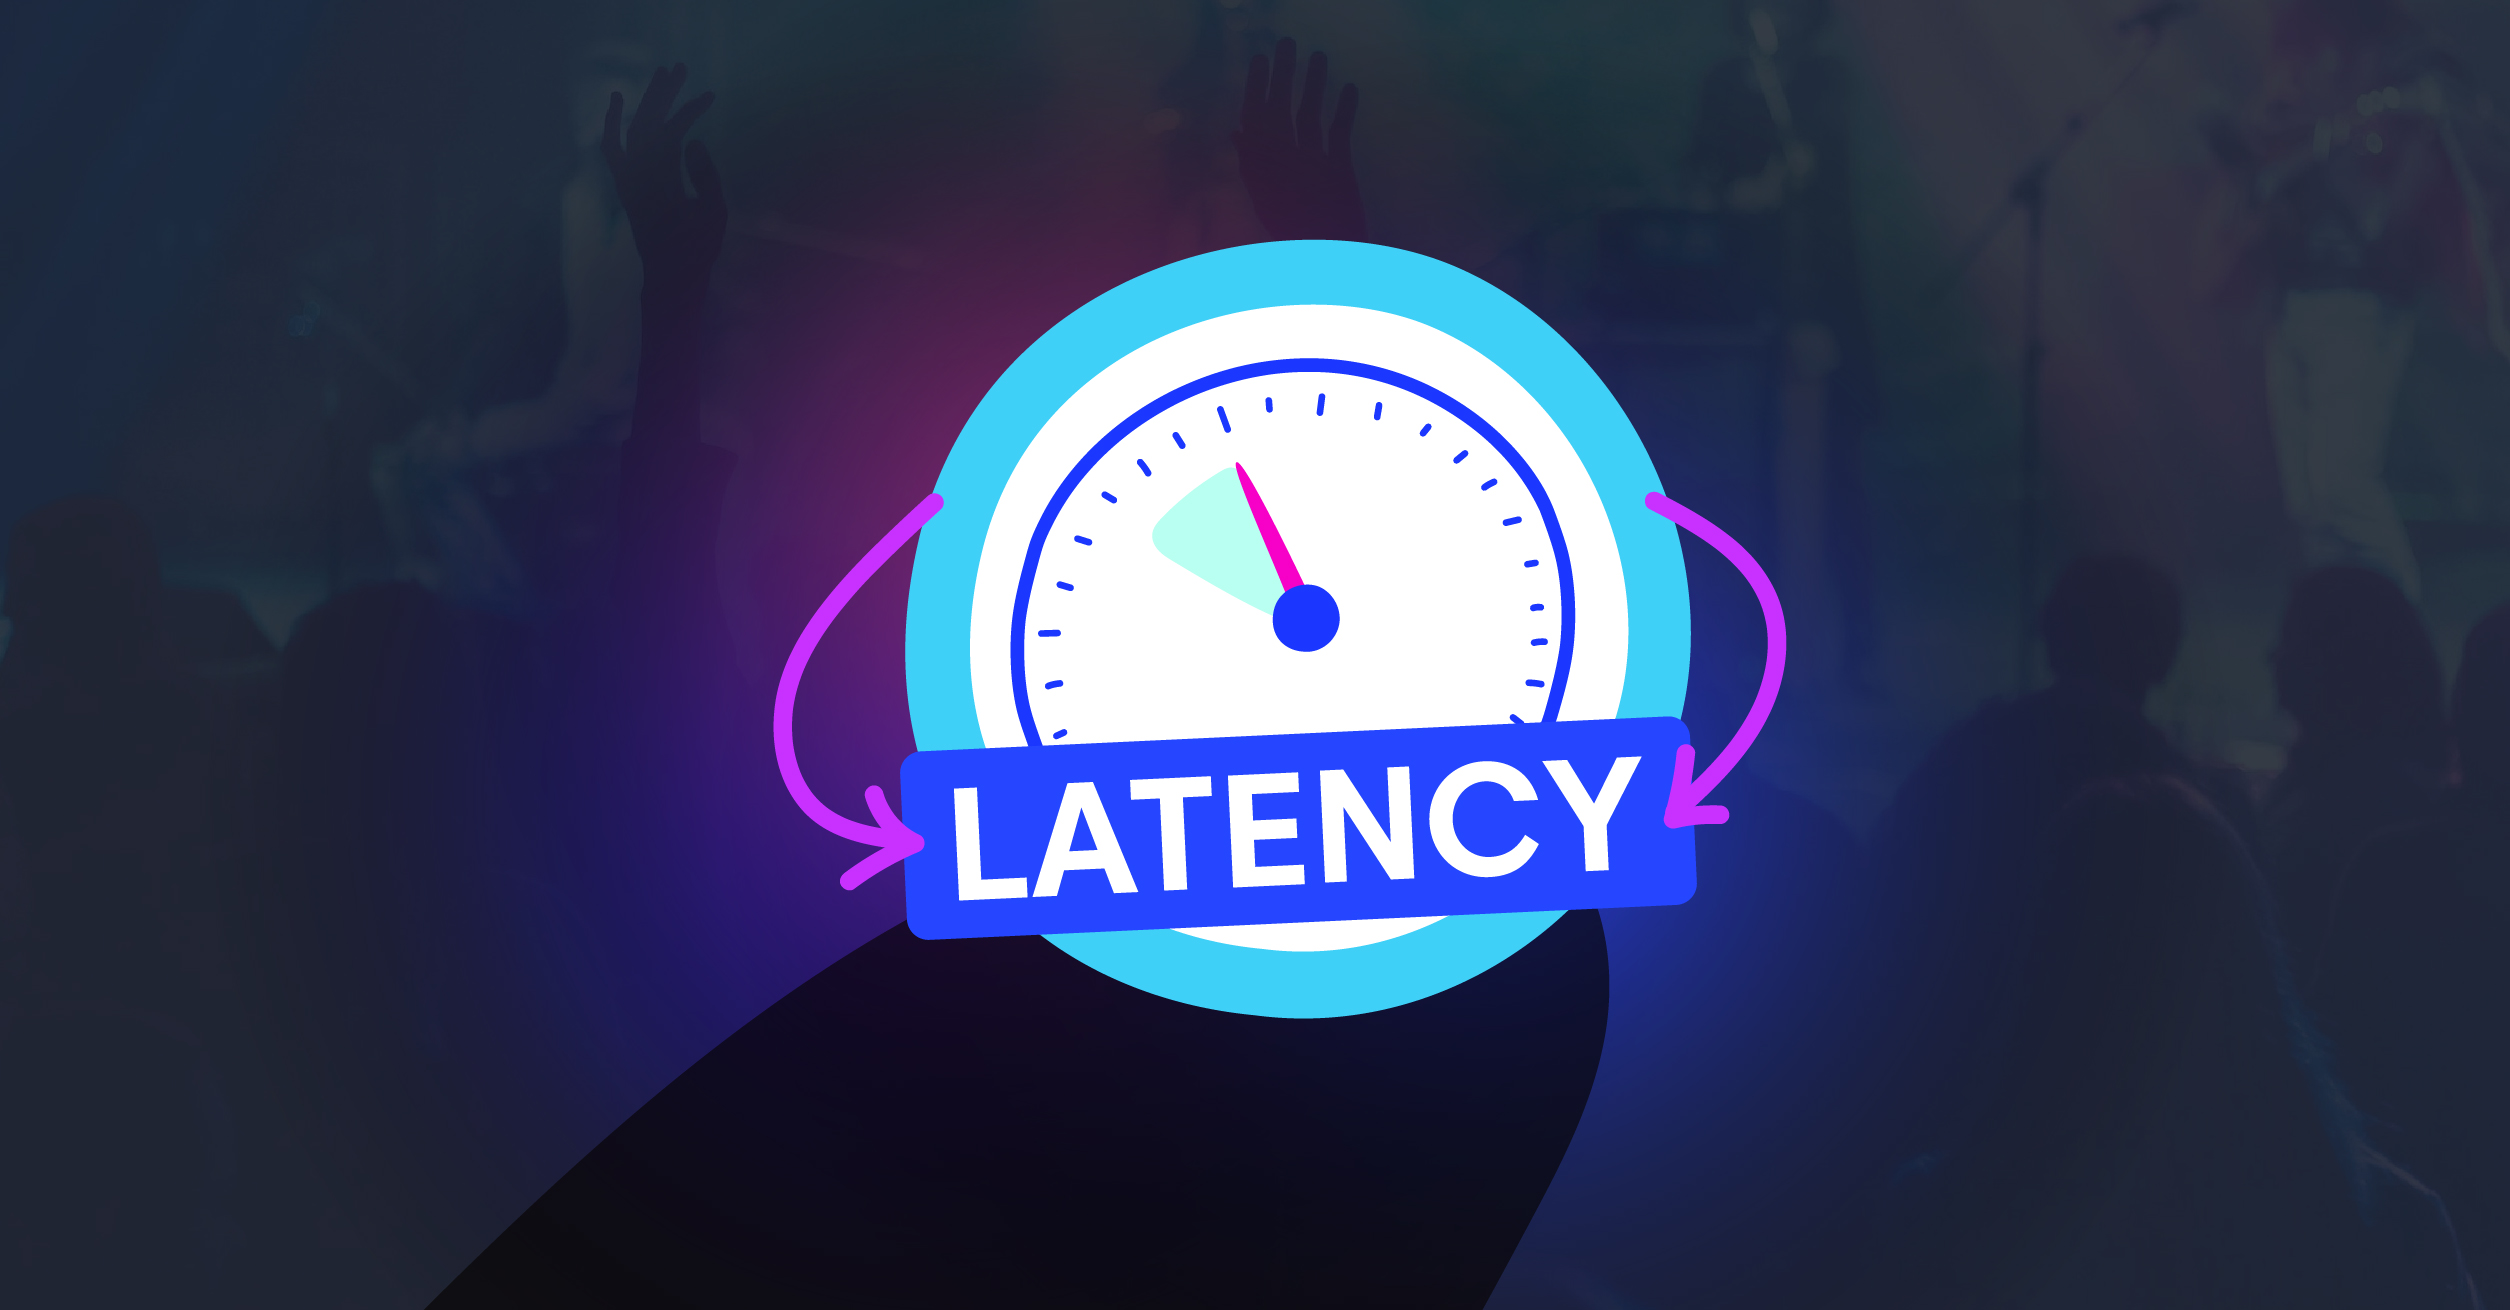 Video Latency: What Is It & How Does It Matter in Streaming?